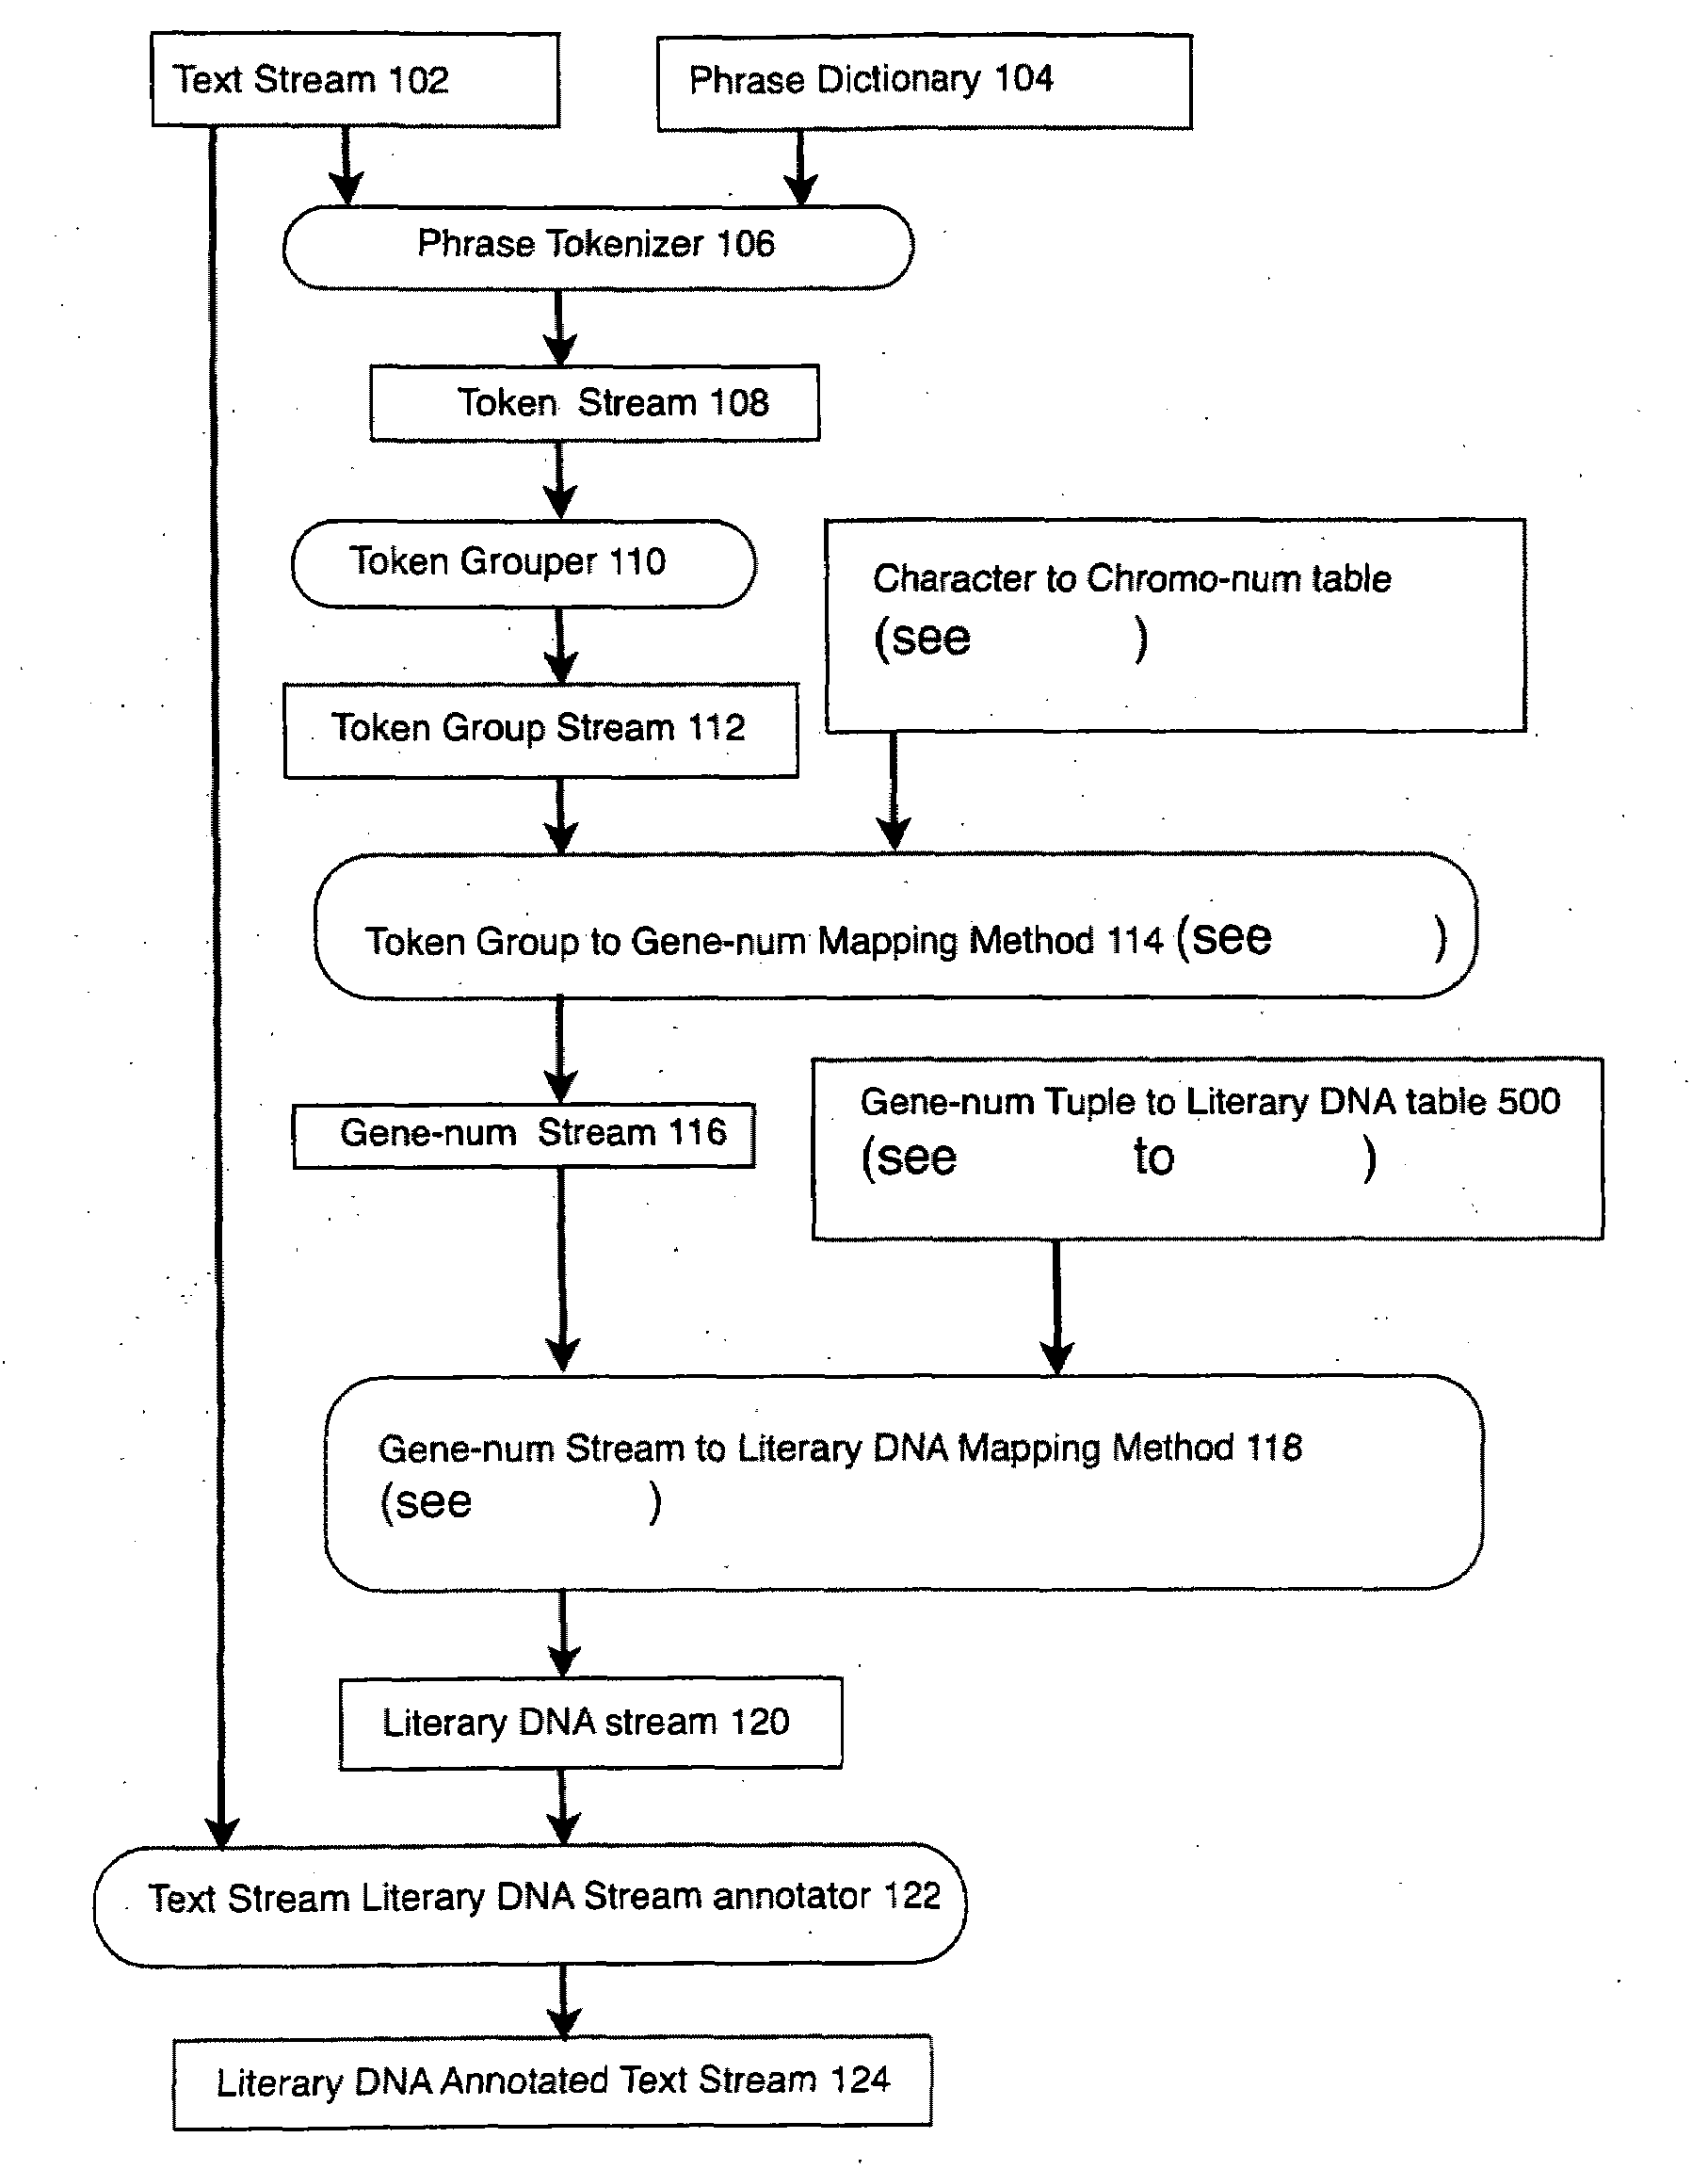 System and method for analyzing text using emotional intelligence factors